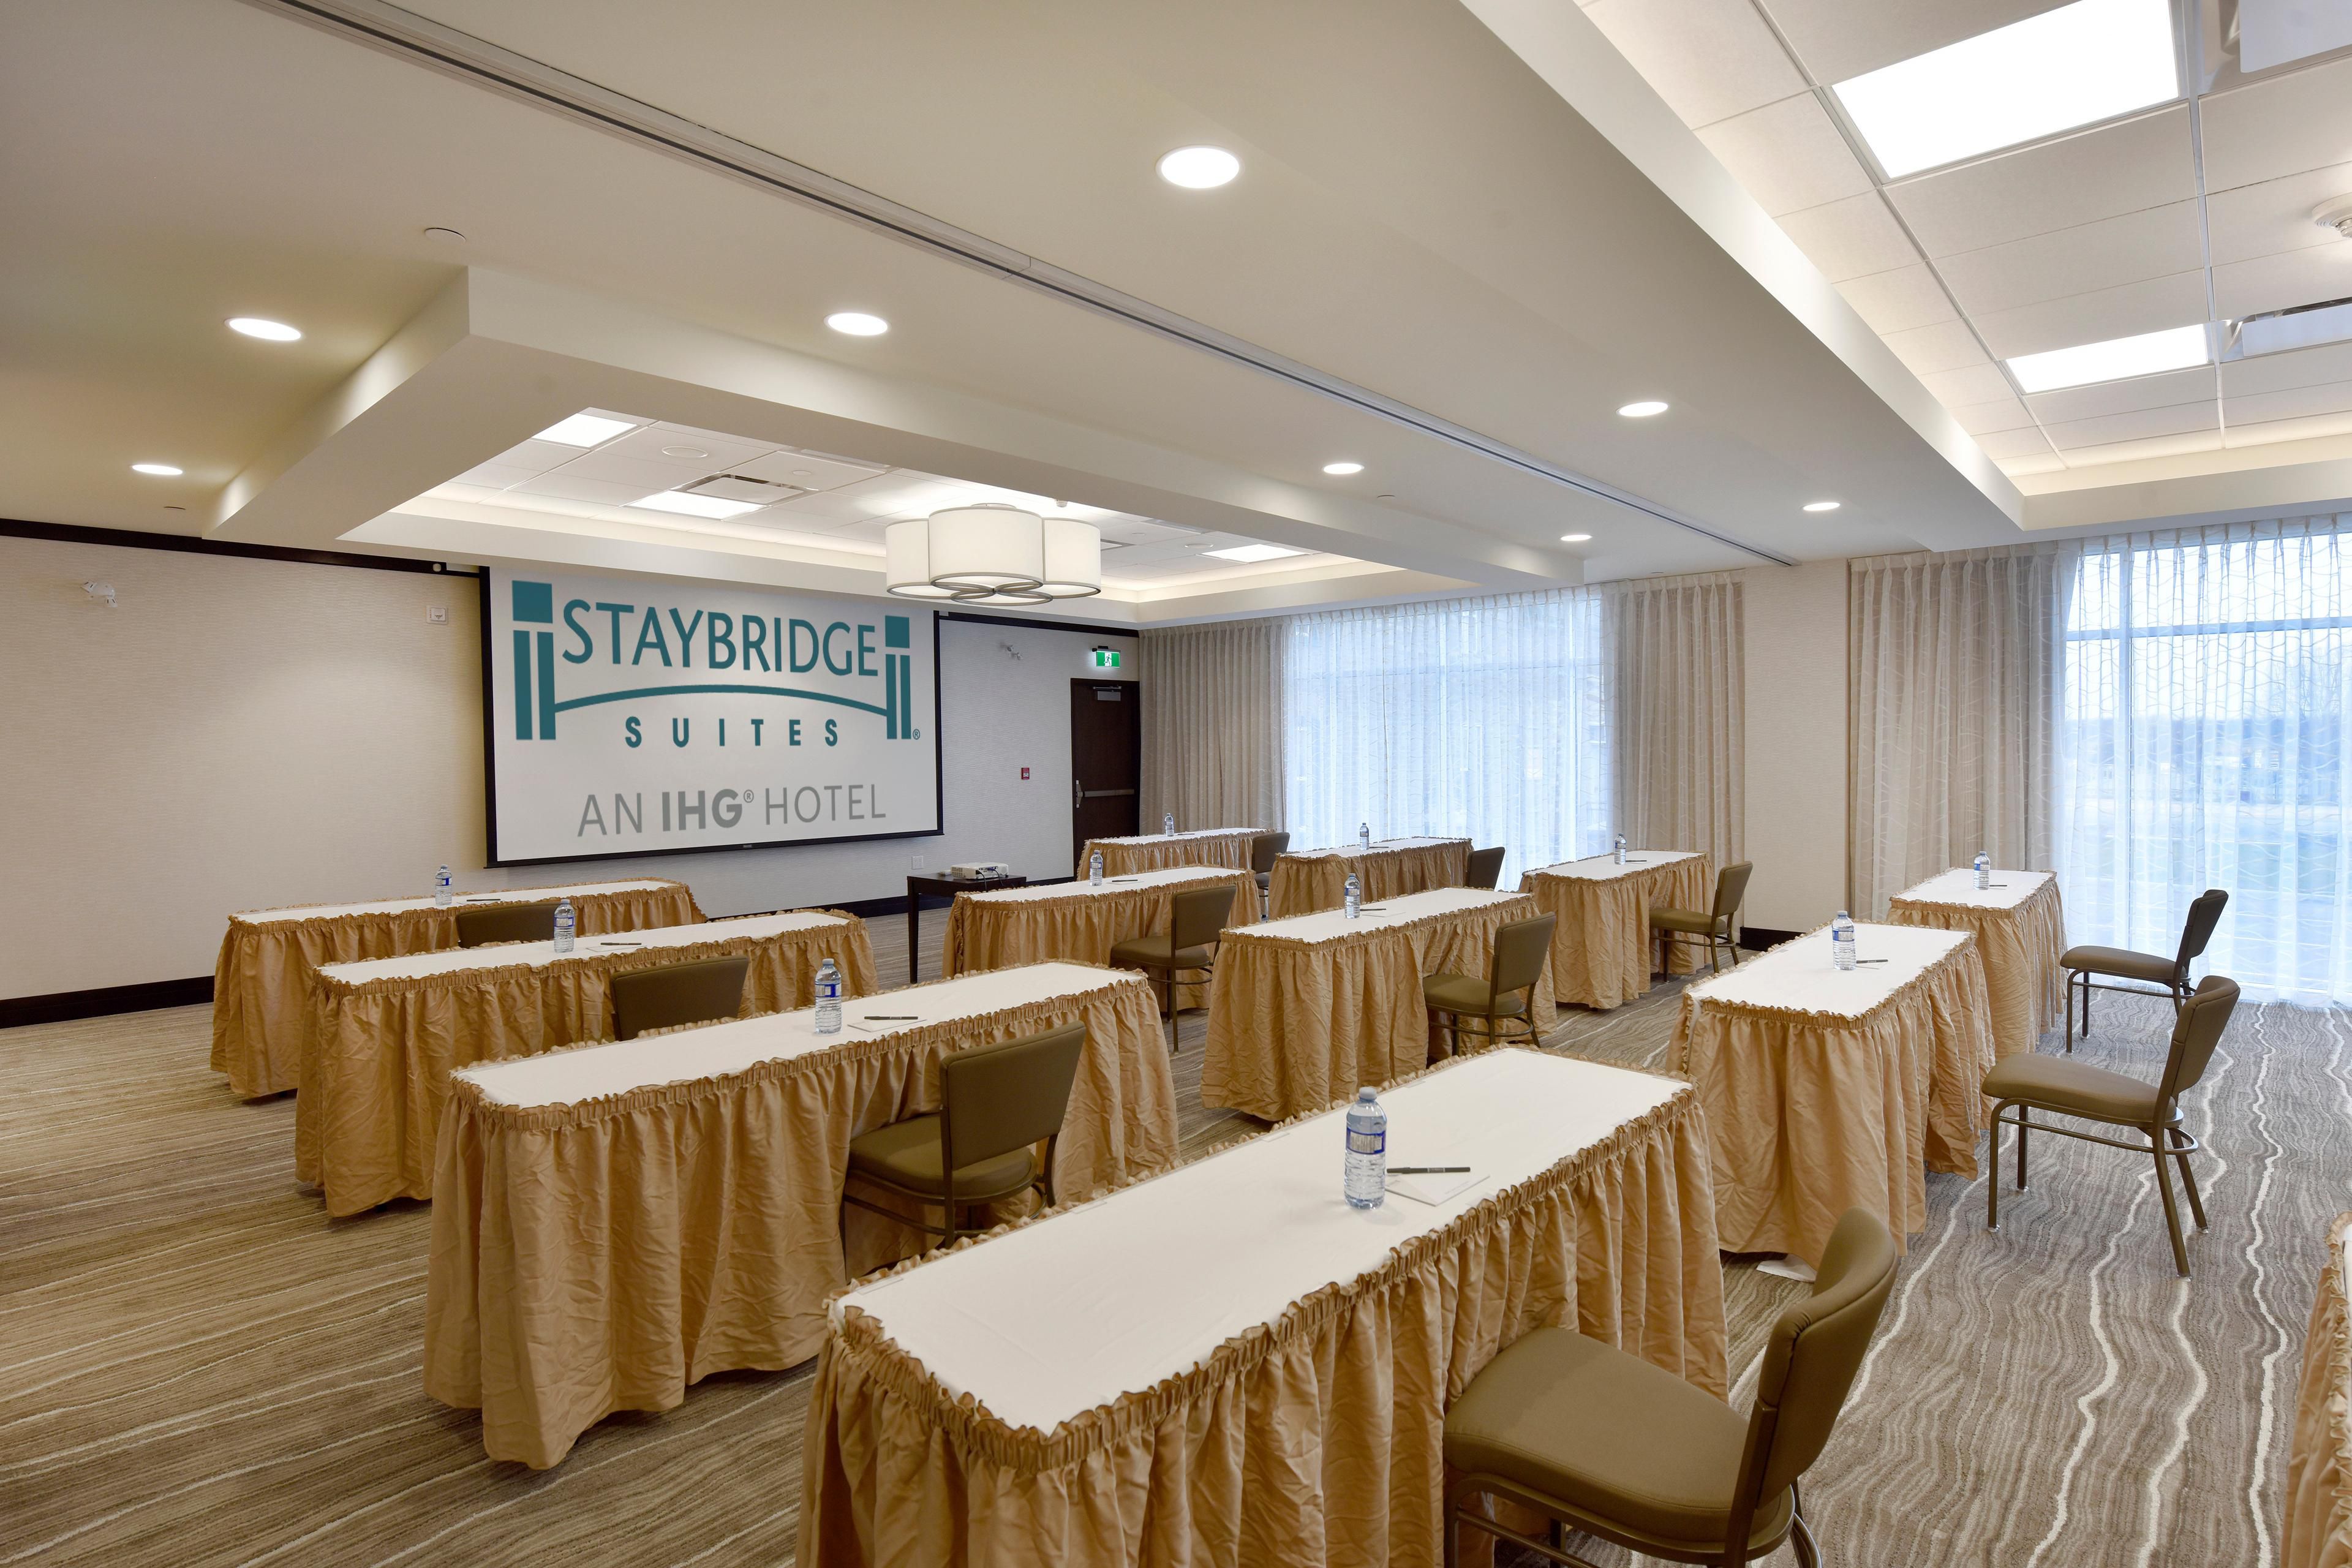 Staybridge Suites Waterloo/St. Jacobs offers over 1,500 square feet of versatile meeting space boasting large windows with natural light. Our Woolwich Room is available in a variety of arrangements, with audio-visual aids, and catering options available. Contact us today!